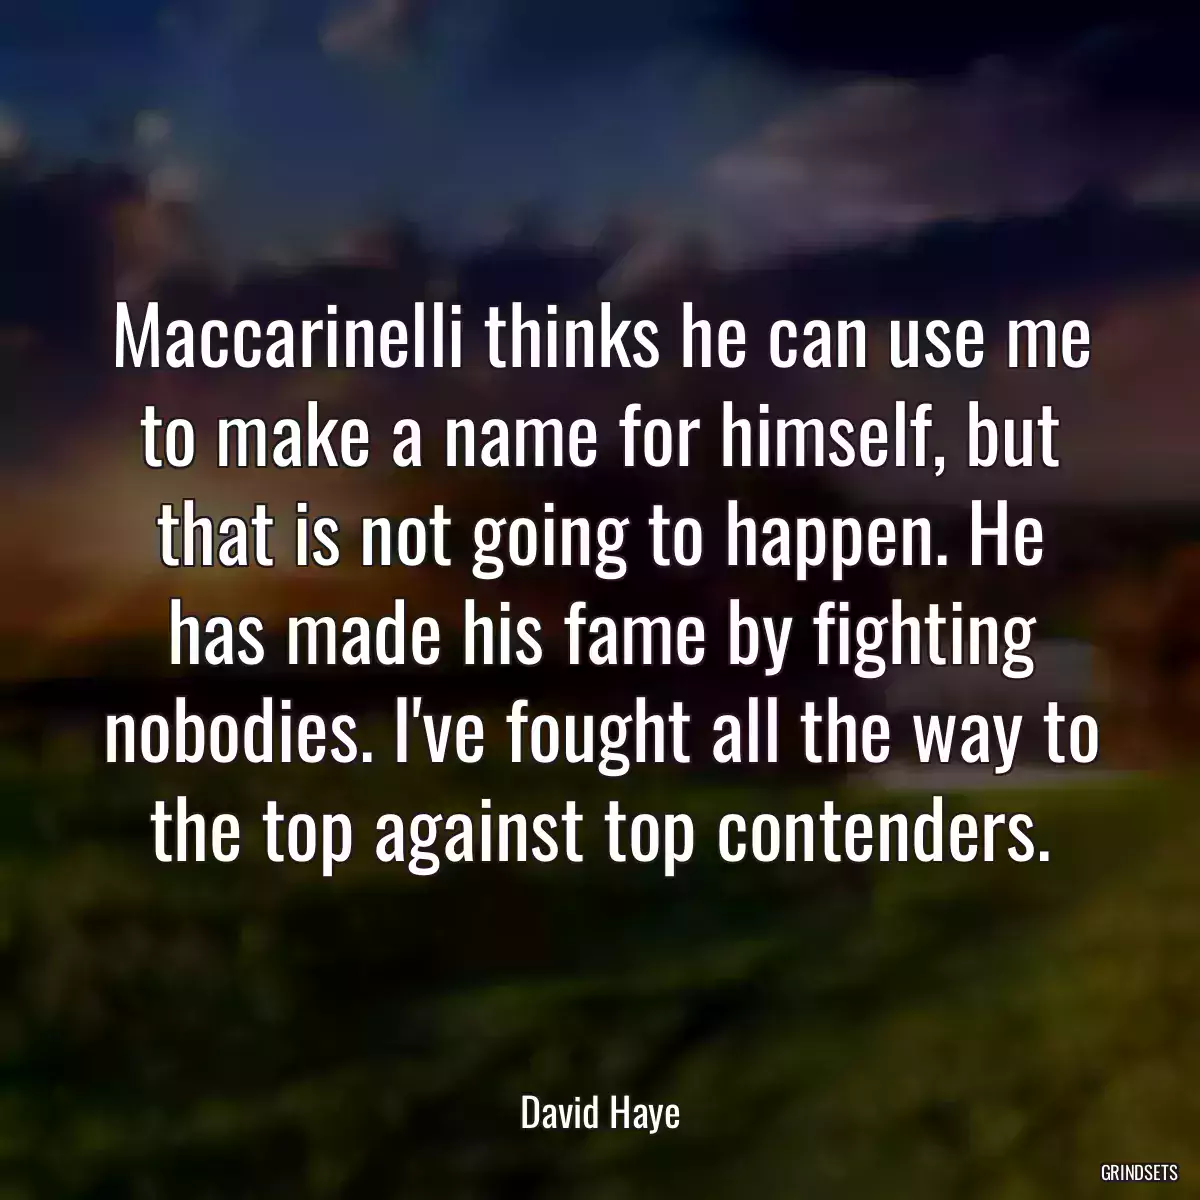 Maccarinelli thinks he can use me to make a name for himself, but that is not going to happen. He has made his fame by fighting nobodies. I\'ve fought all the way to the top against top contenders.